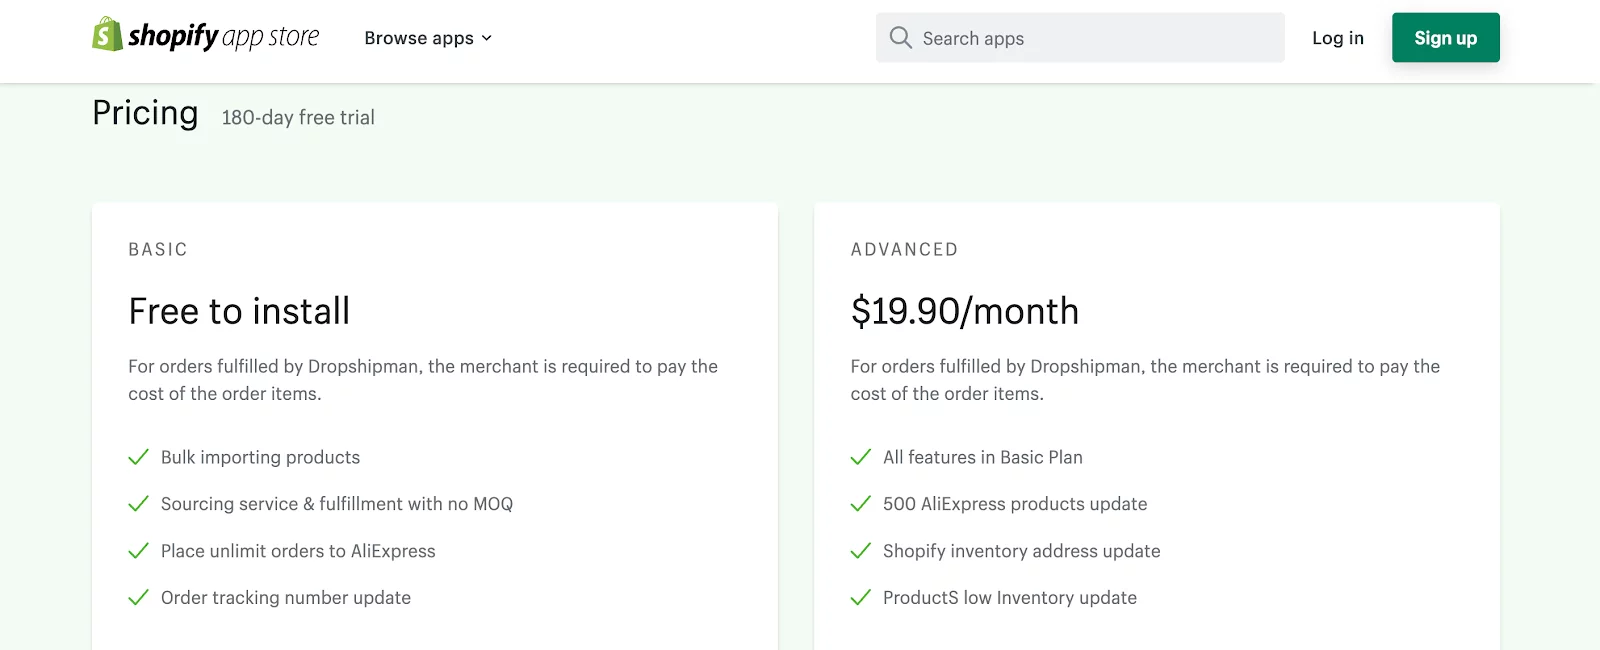 Shopify Apps for Dropshipping - Pricing of DSM